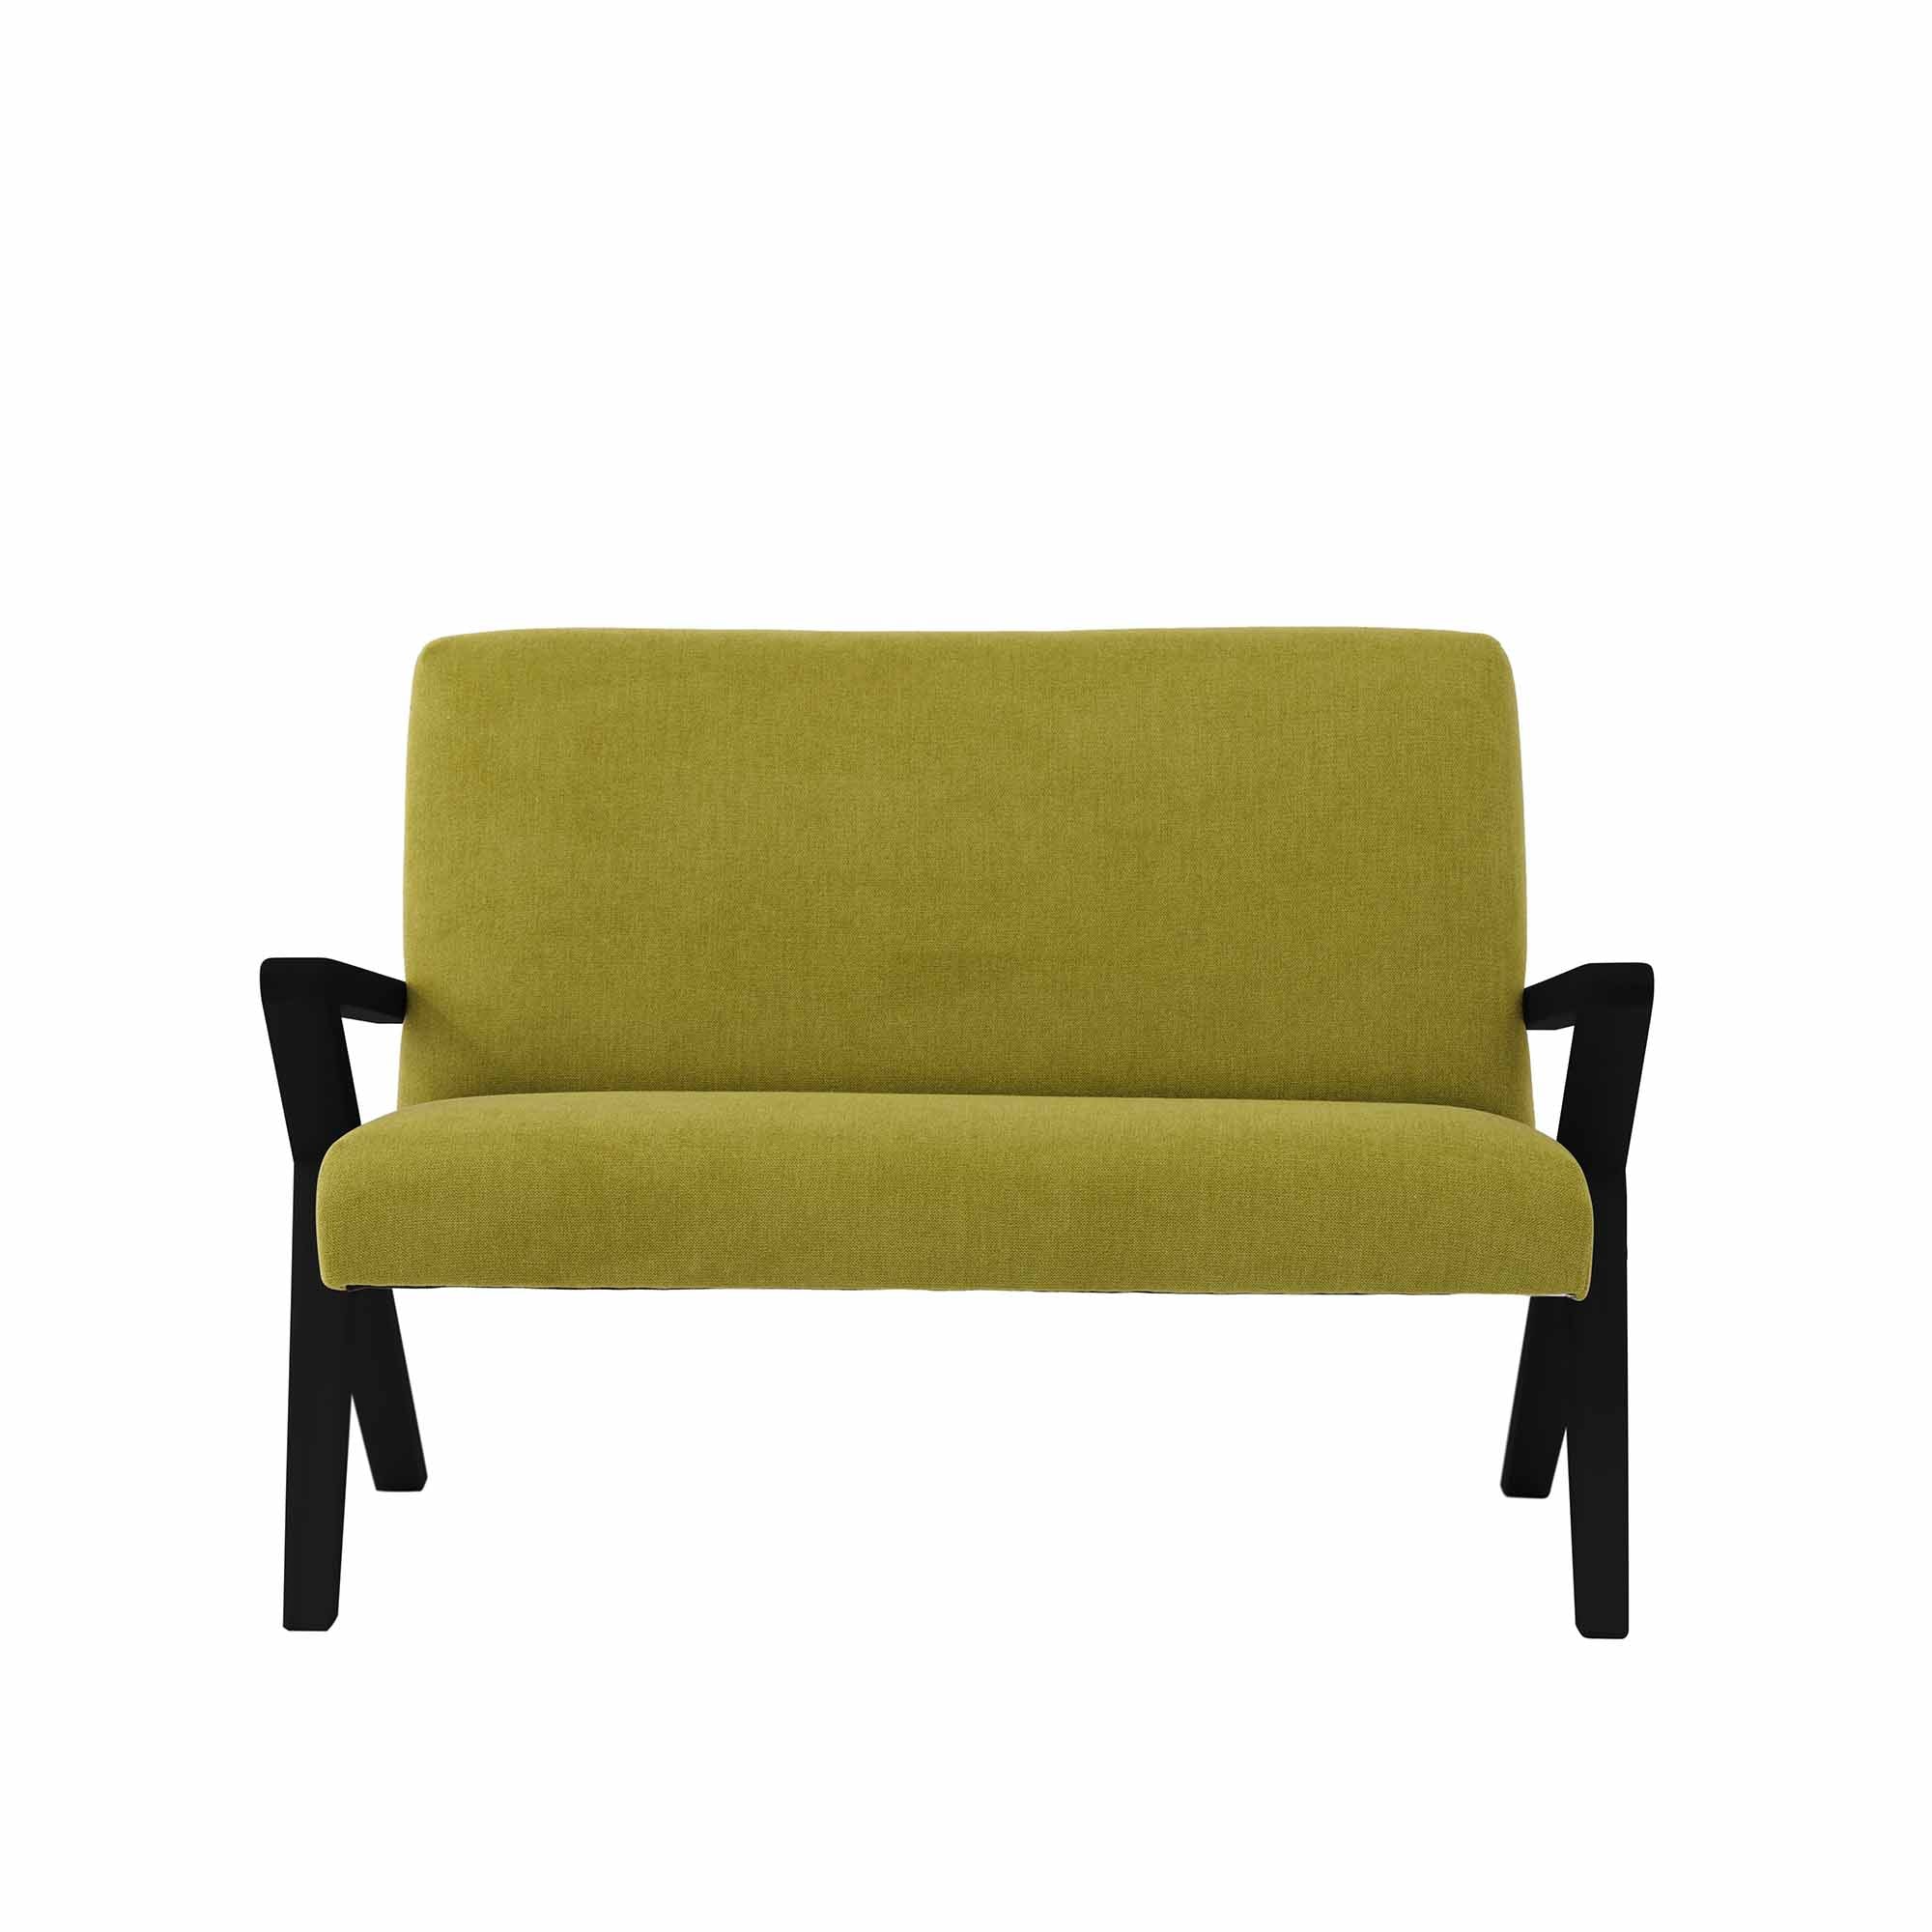  2-Seater Sofa, Beech Wood Frame, Black Lacquered green fabric, front view